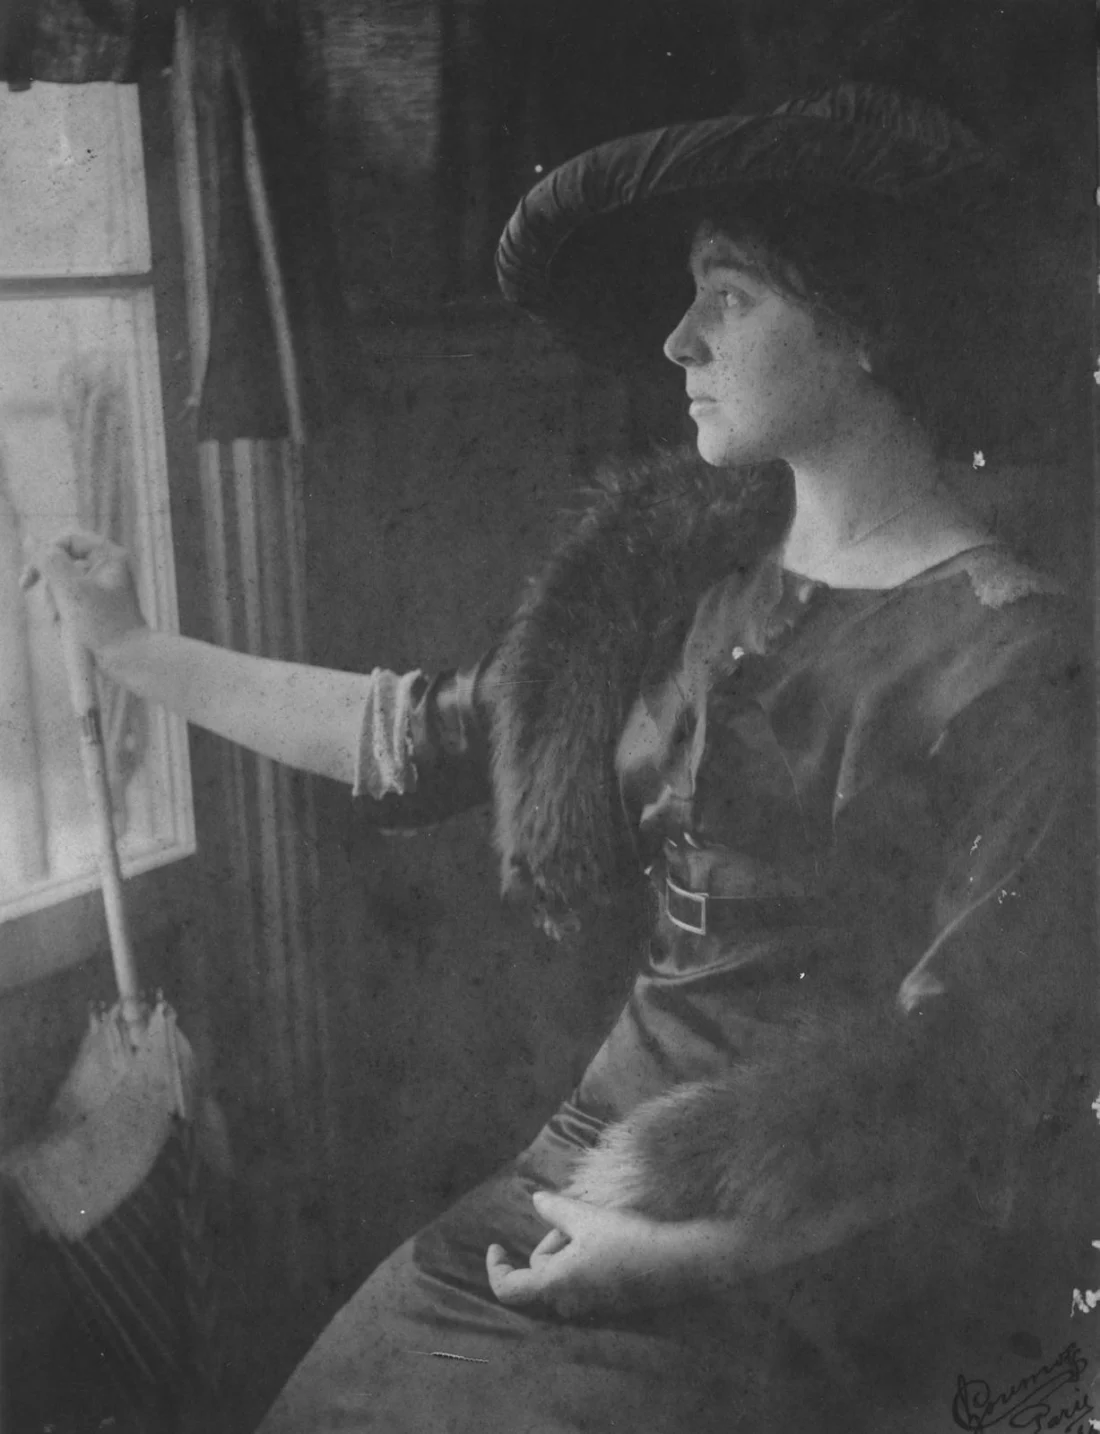 black and white photograph of Mela Muter who holds an umbrella and looks out a window